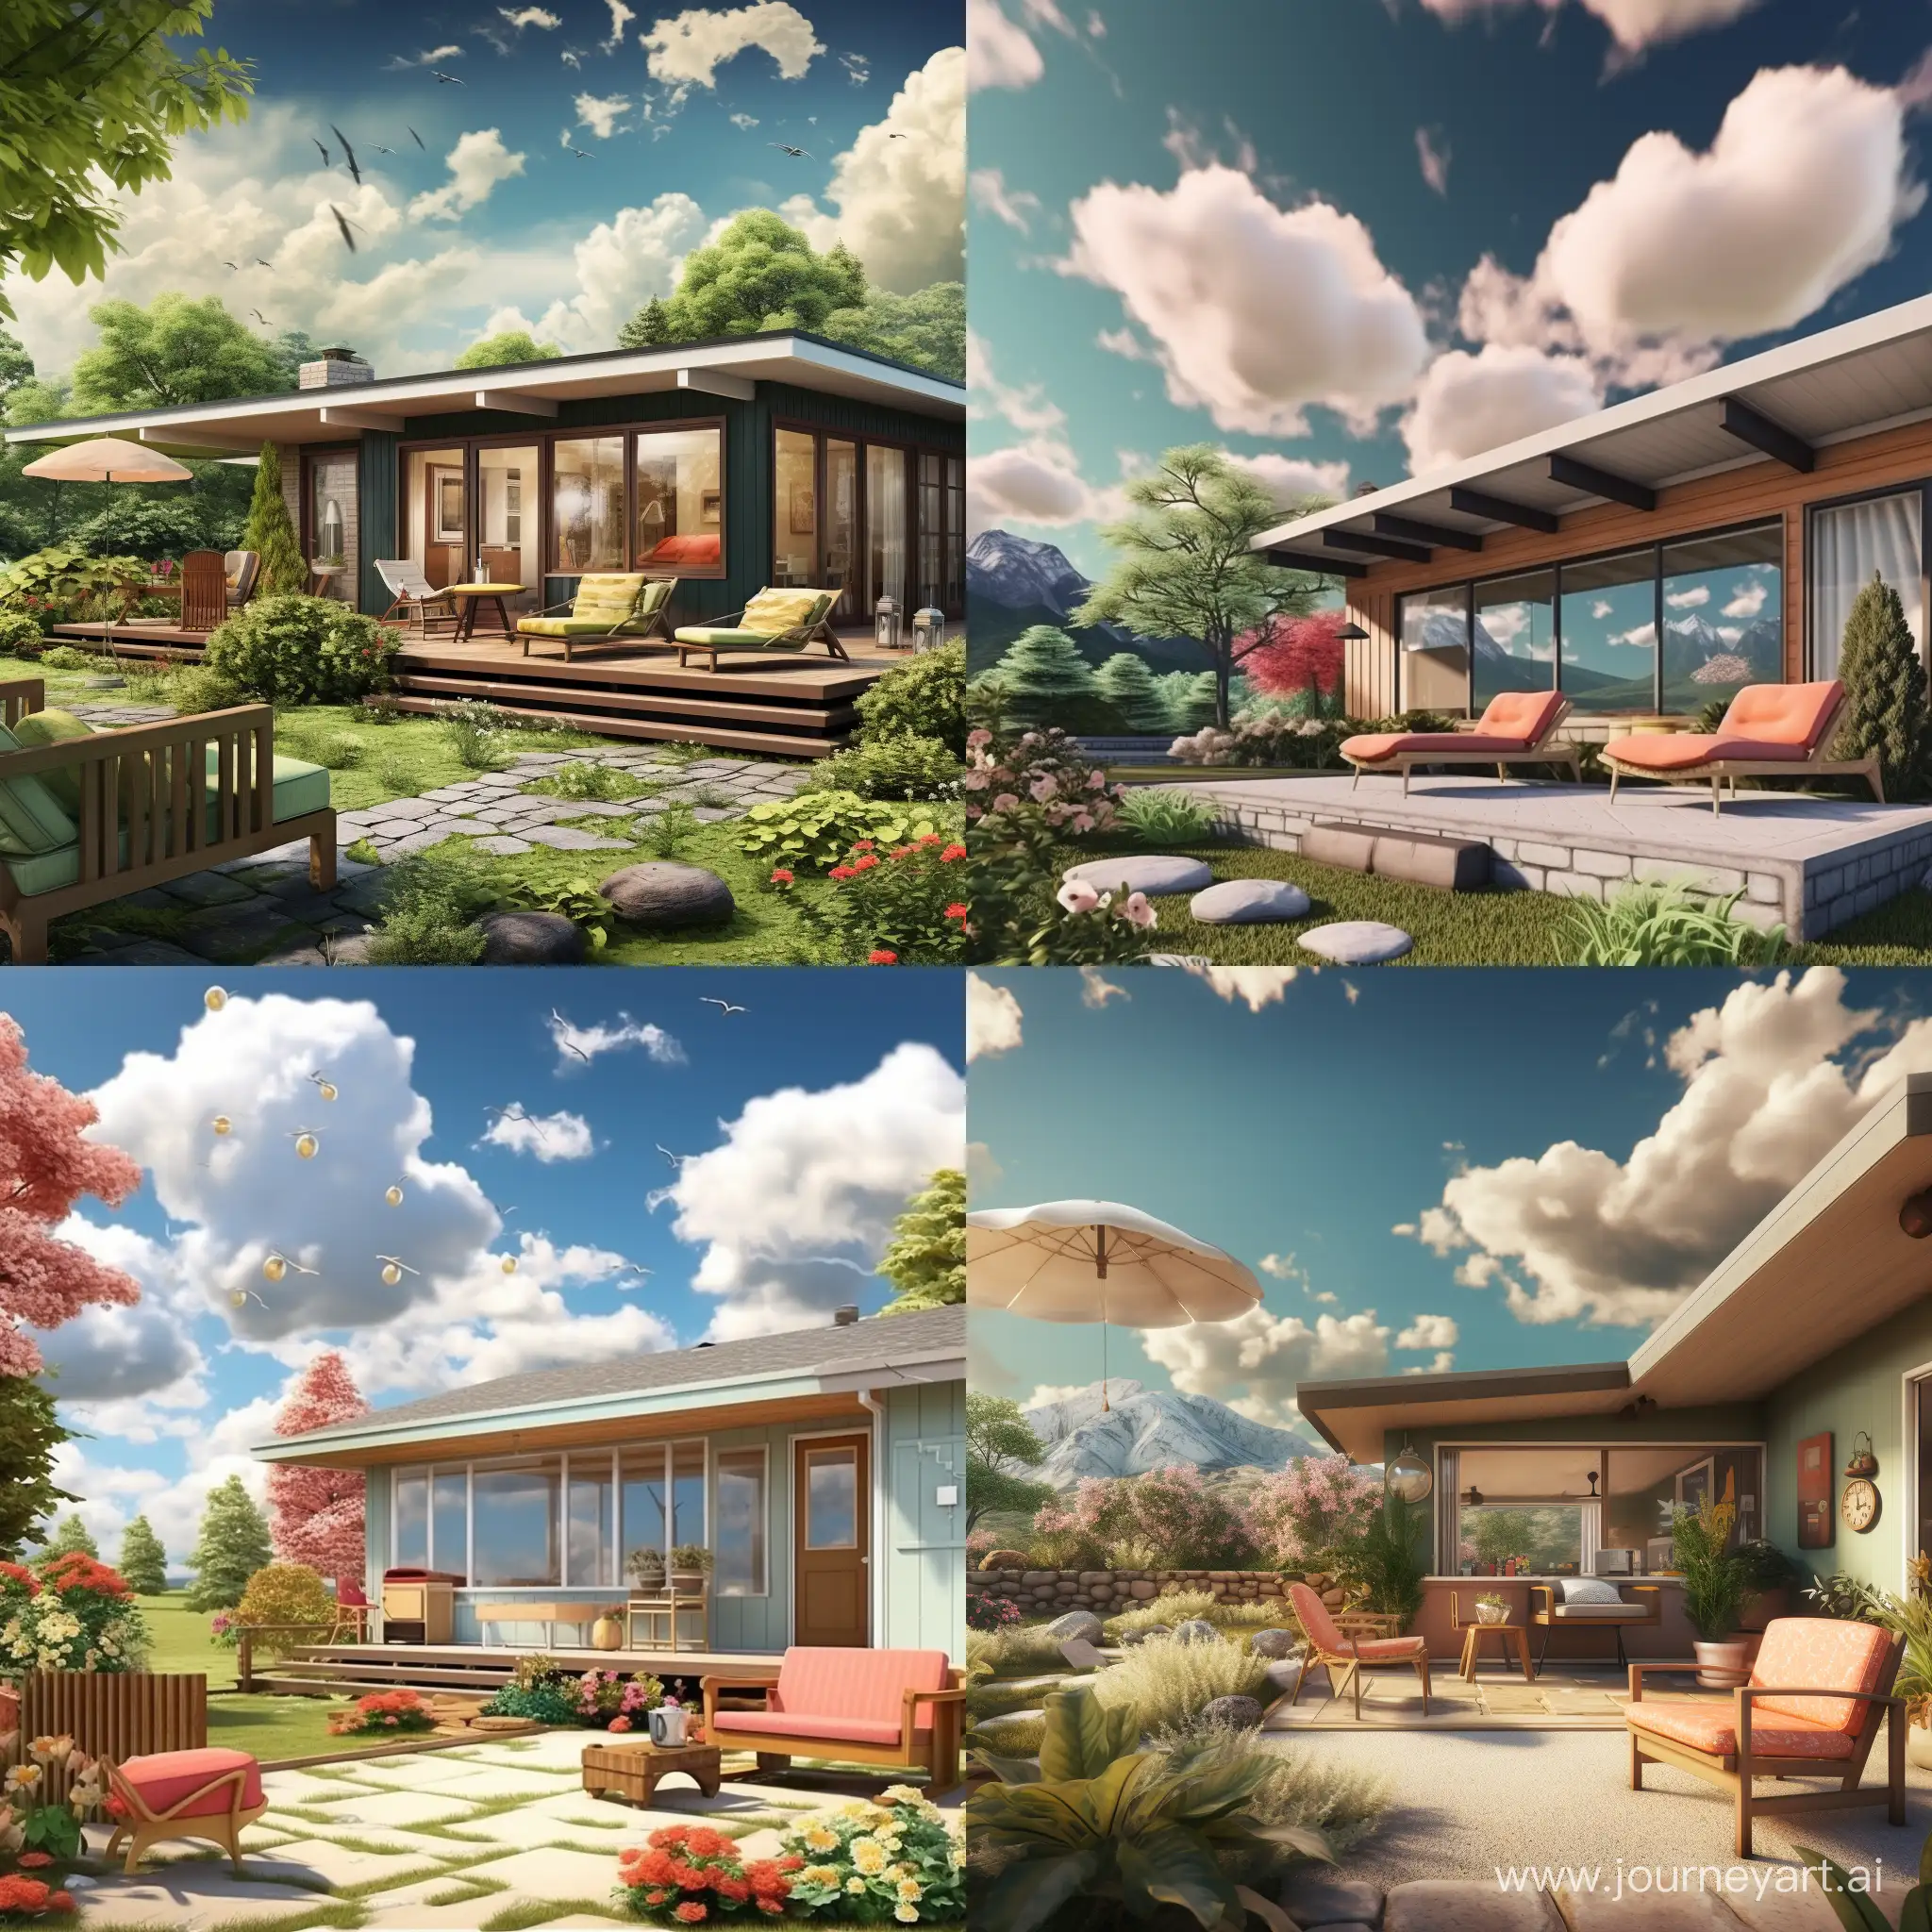 Midcentury-Modern-Cottage-with-Photorealistic-Charm-and-Surrounding-Cloudscape